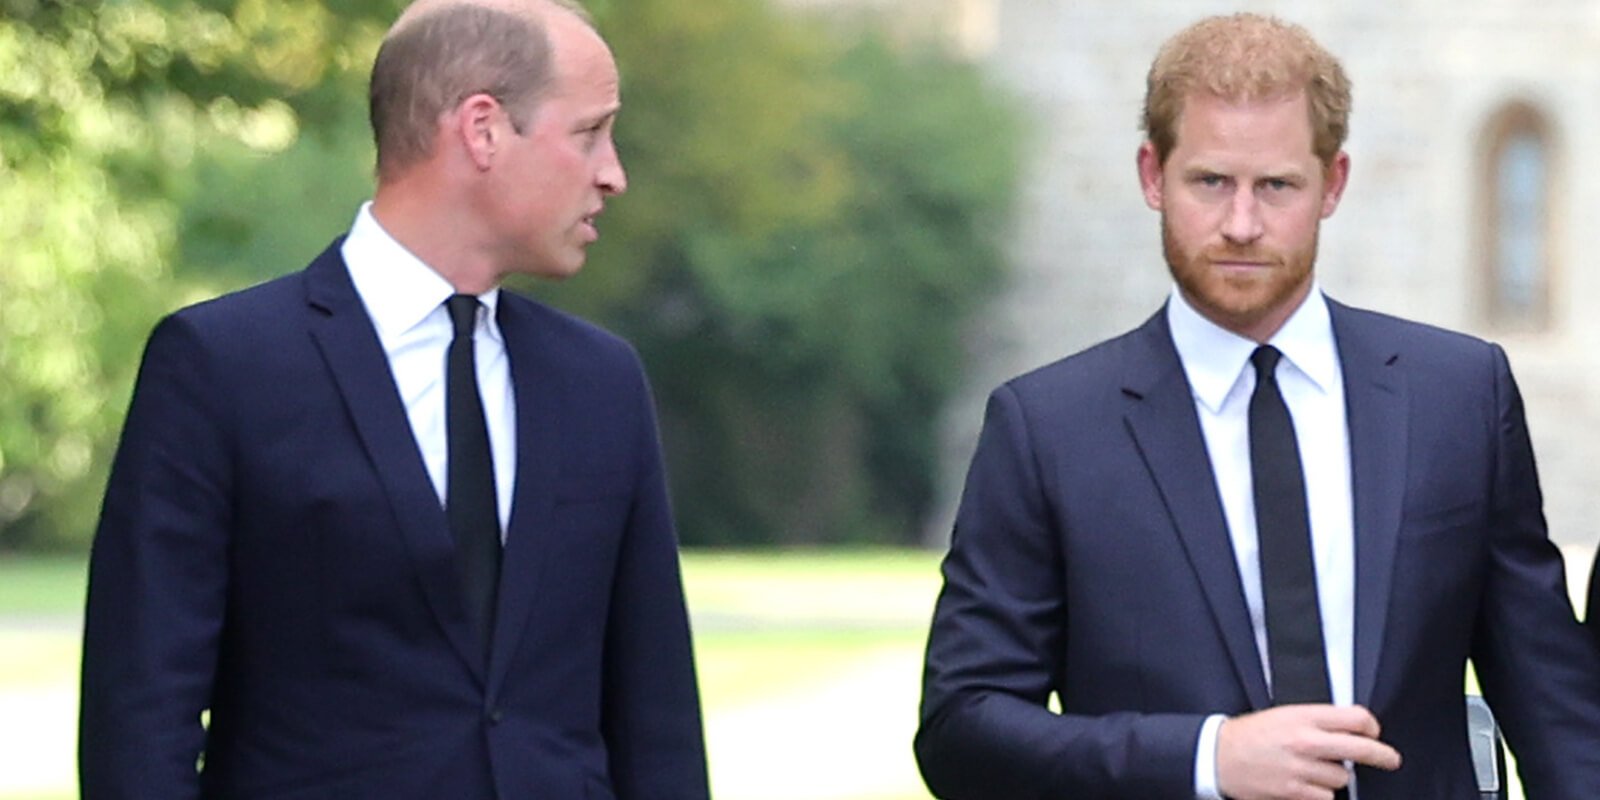 Prince William looks at Prince Harry during a walkabout after Queen Elizabeth II's death.